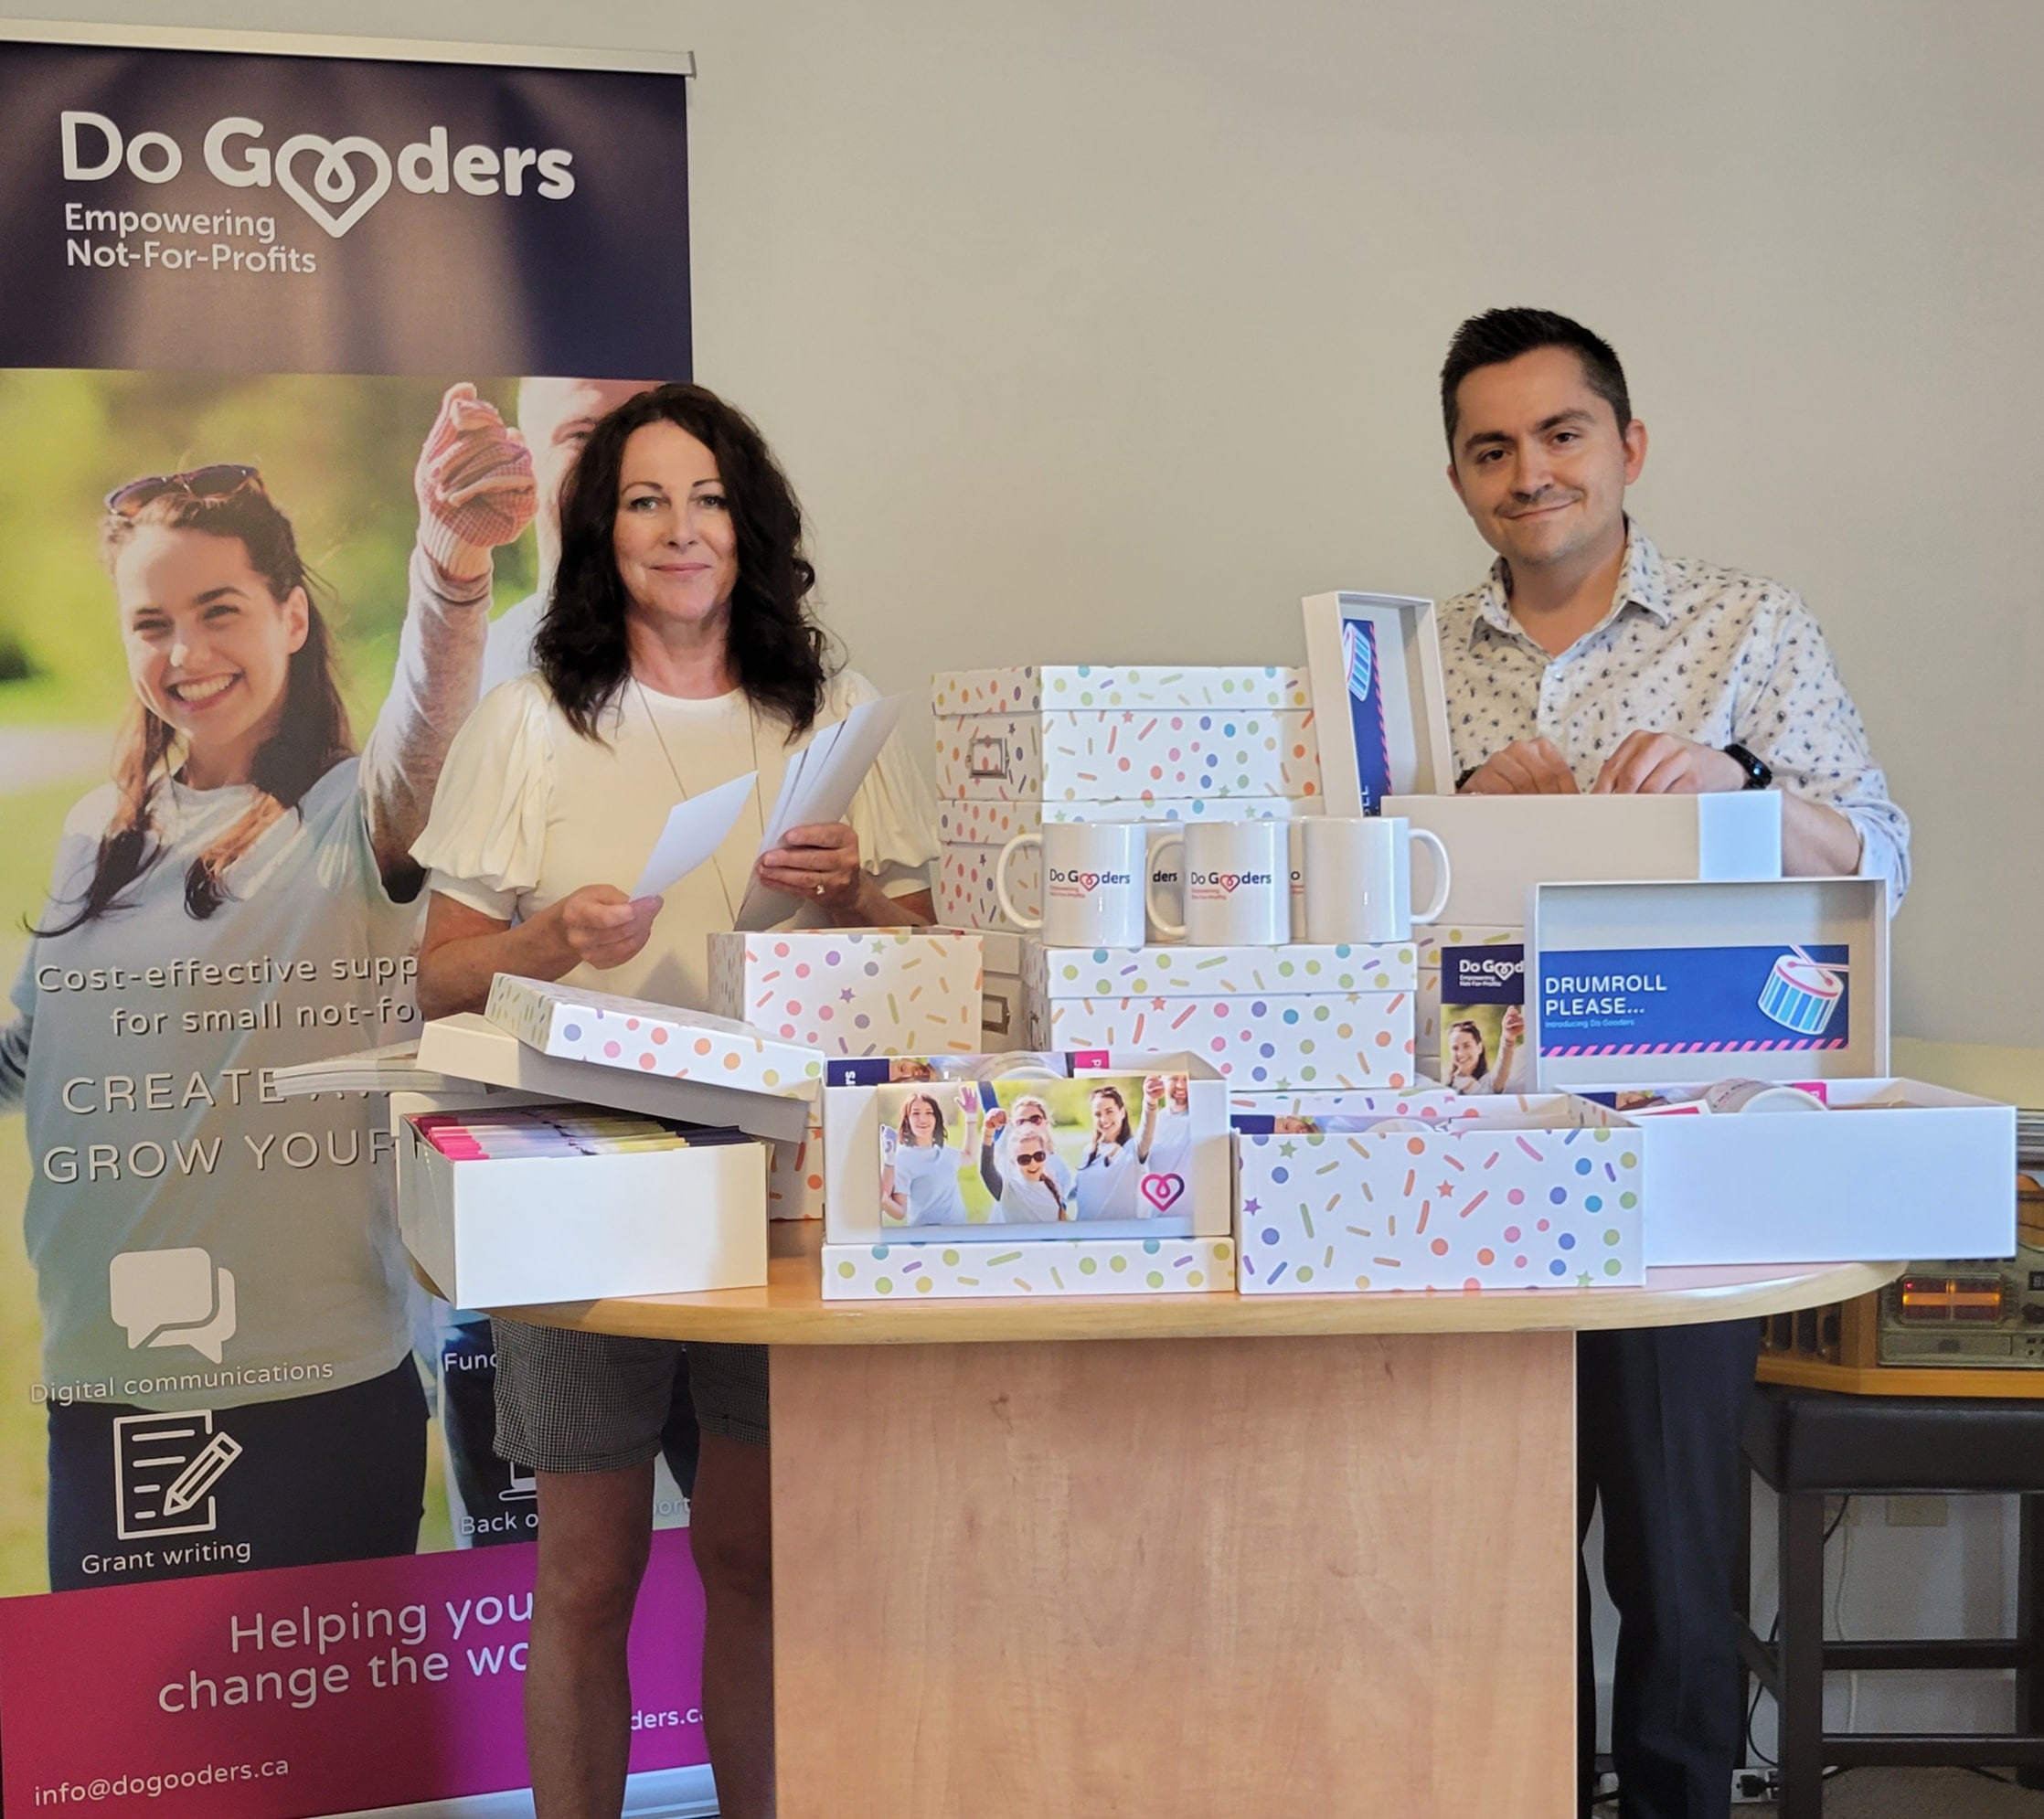 Kathleen Lemieux, CFRE and Stephen Somerville packing "VIP" boxes for the Do Gooders launch